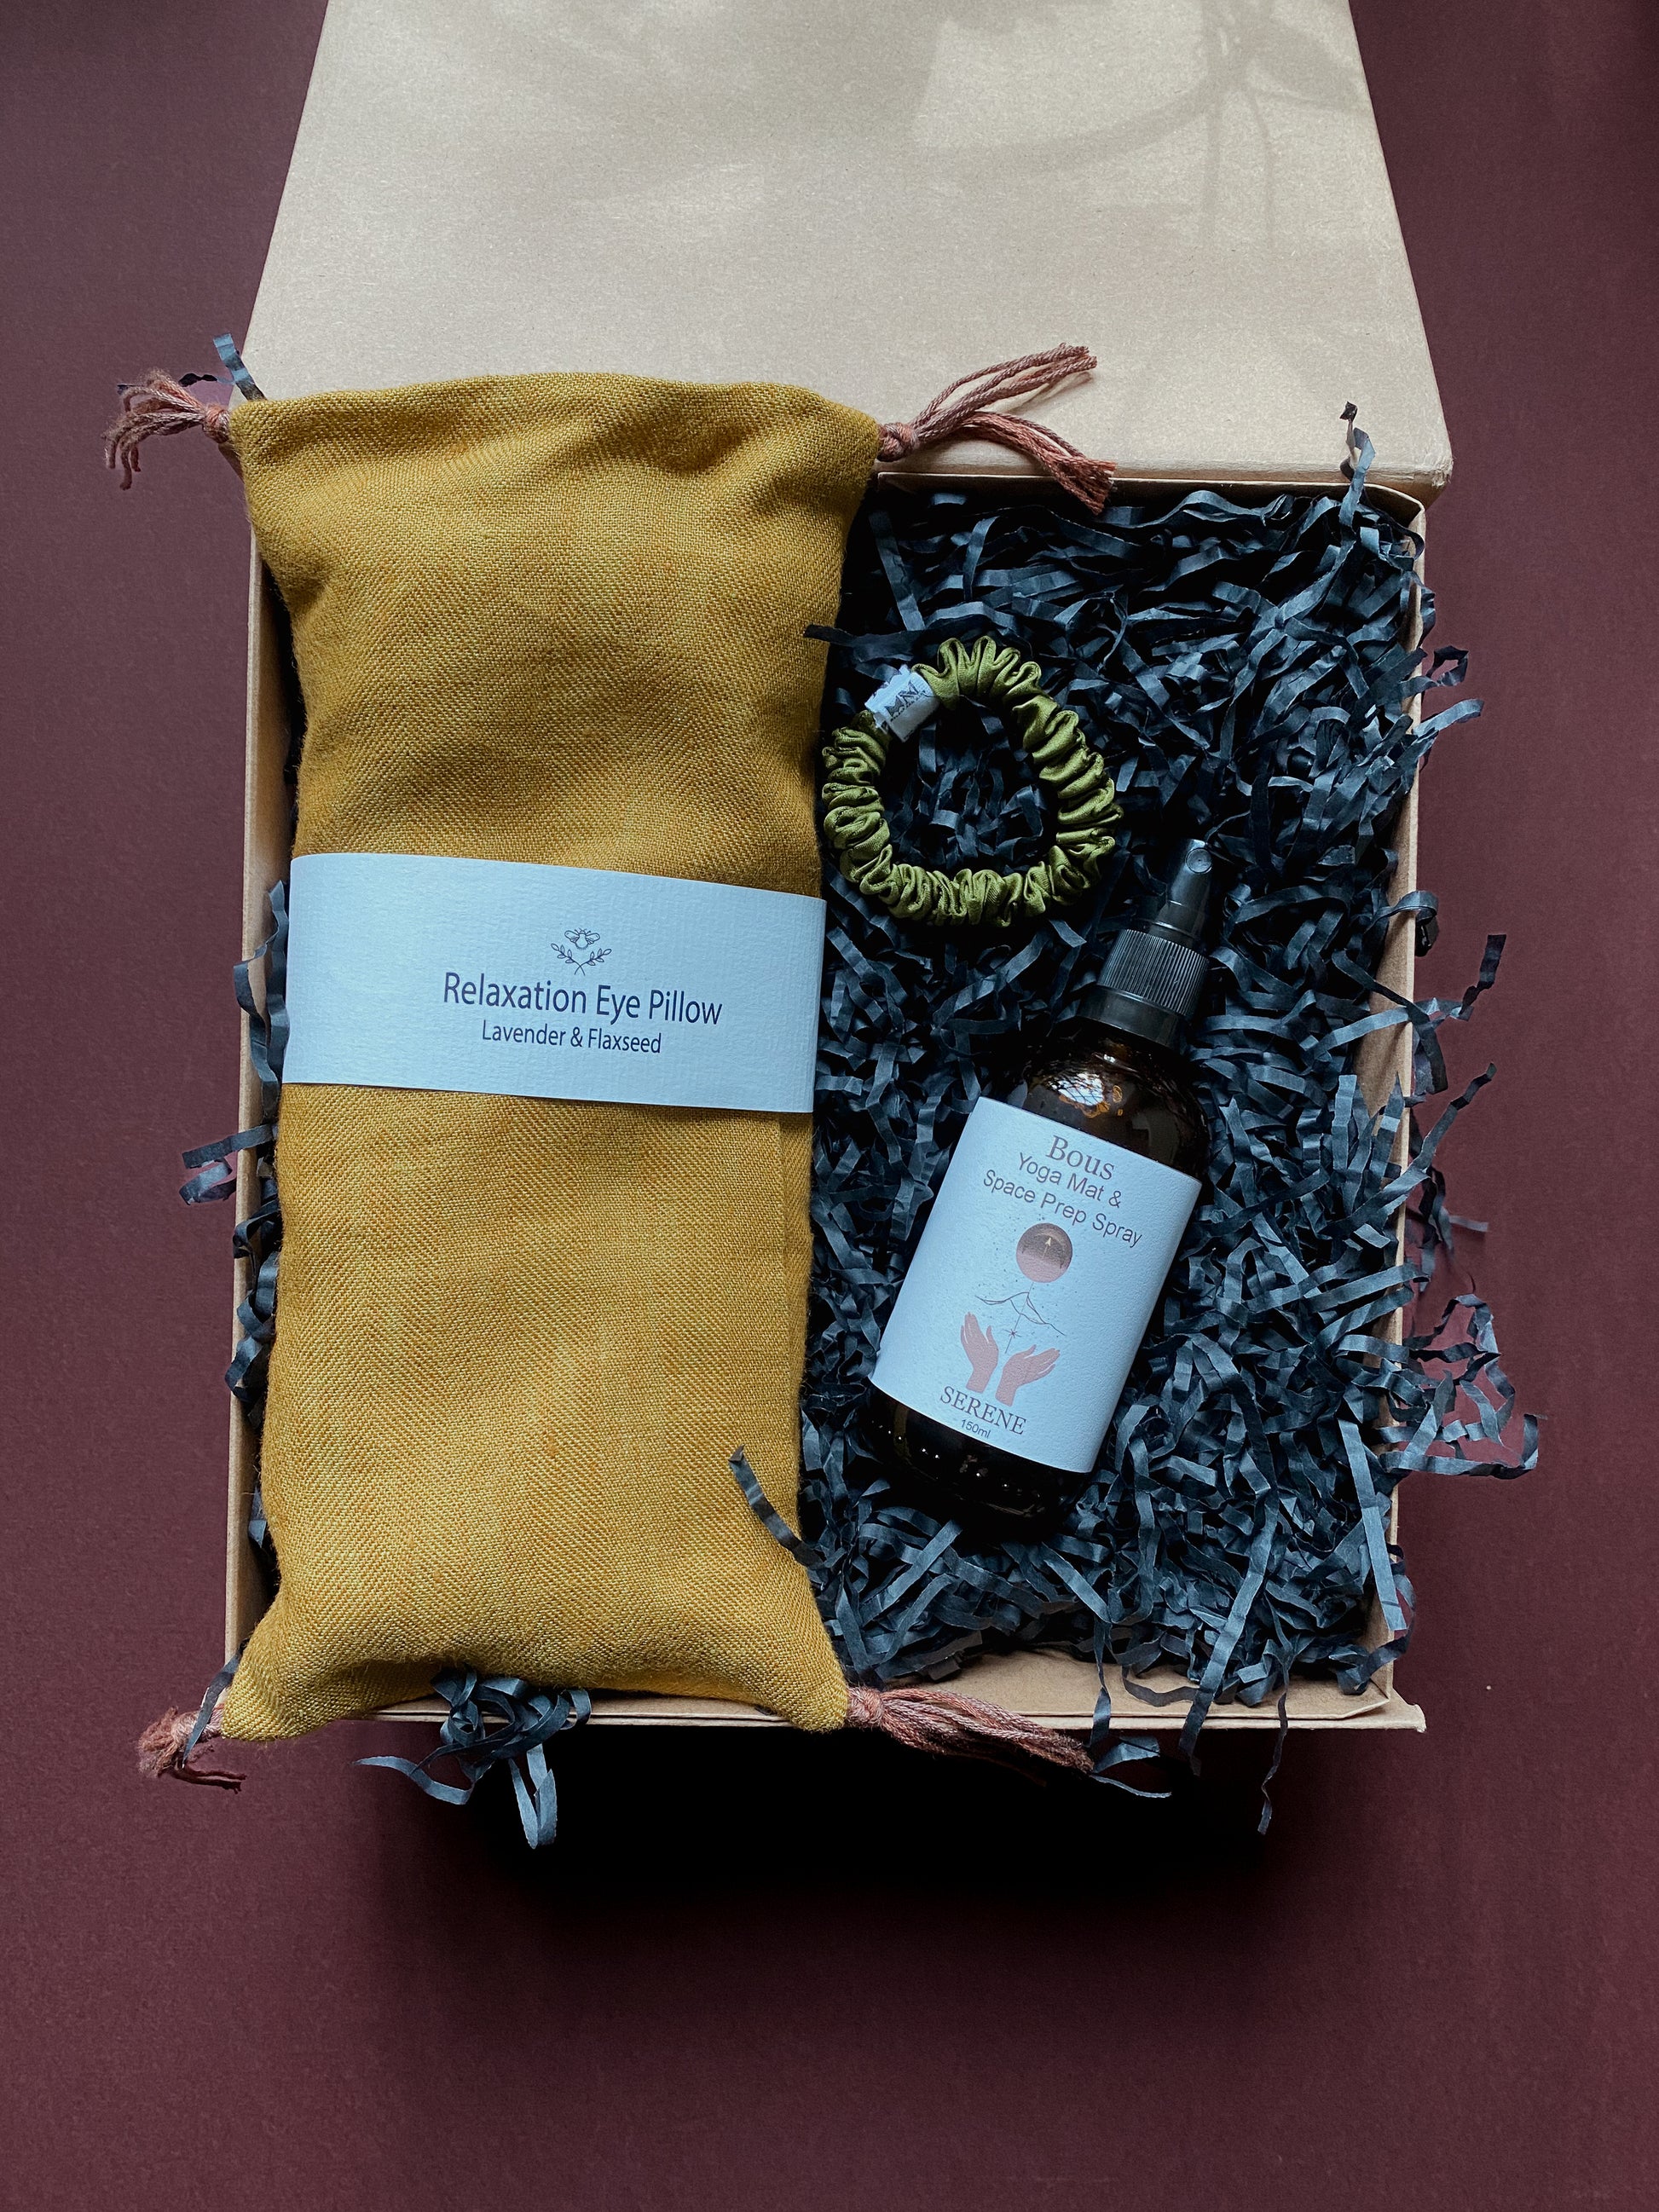 One Month Unlimited Yoga Gift Box - Inlet Yoga Studio